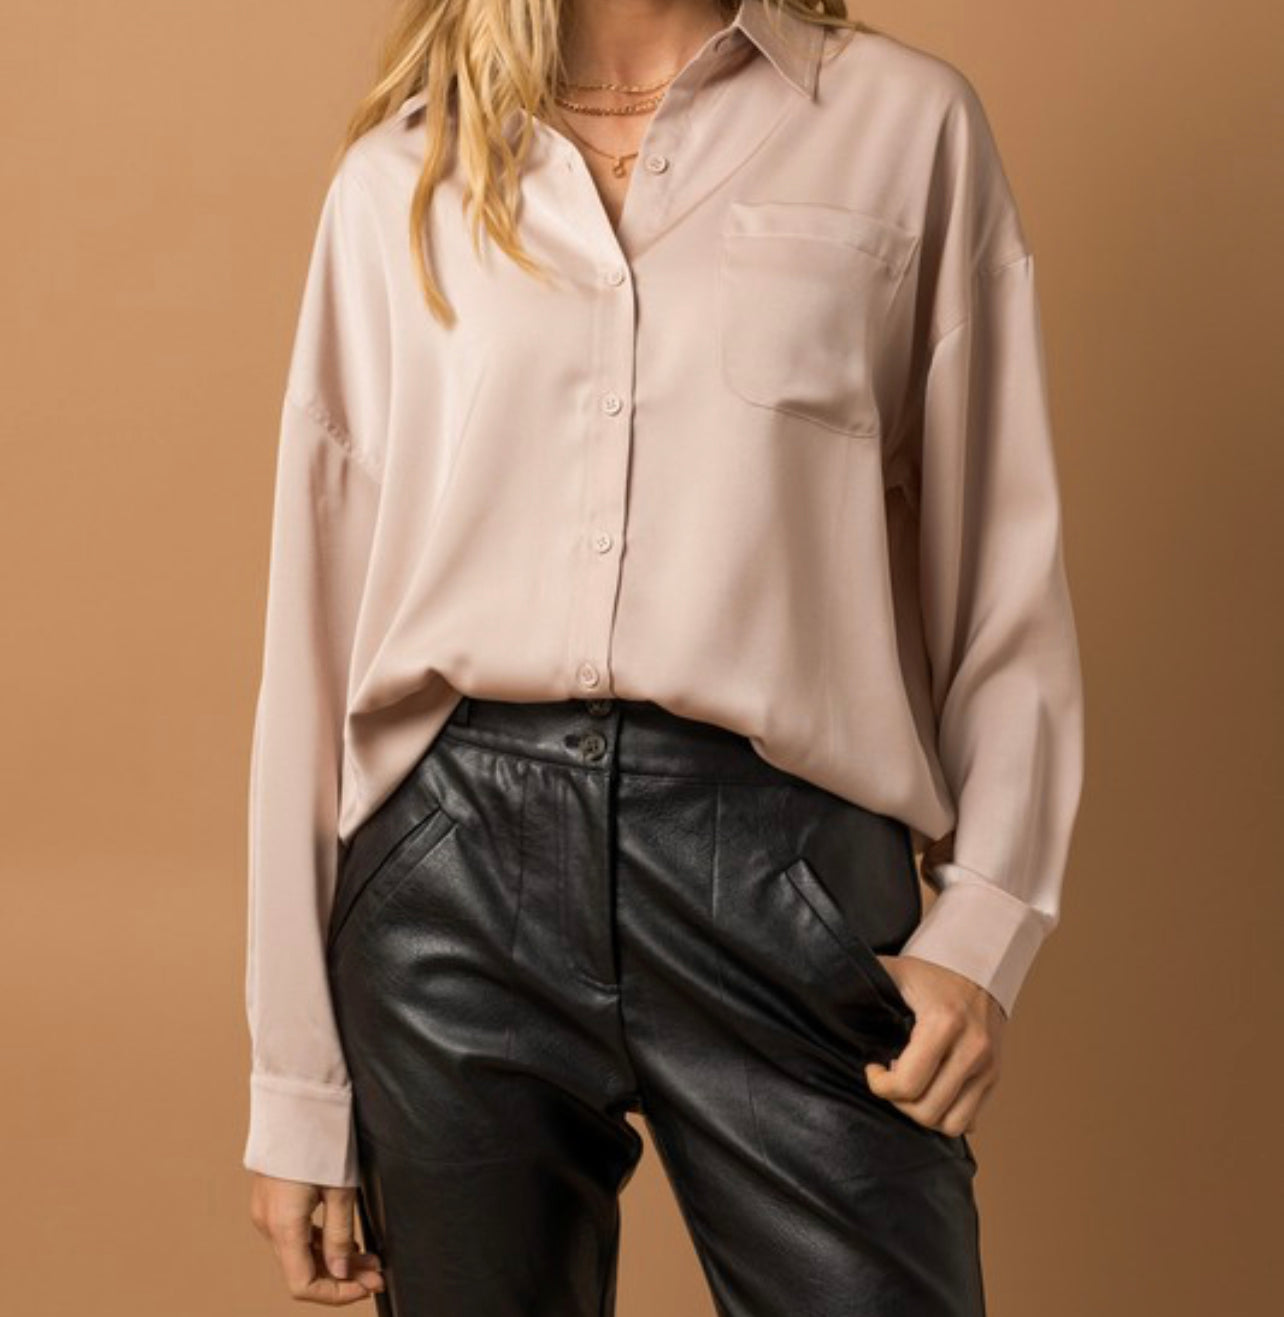 Blouse oversized top